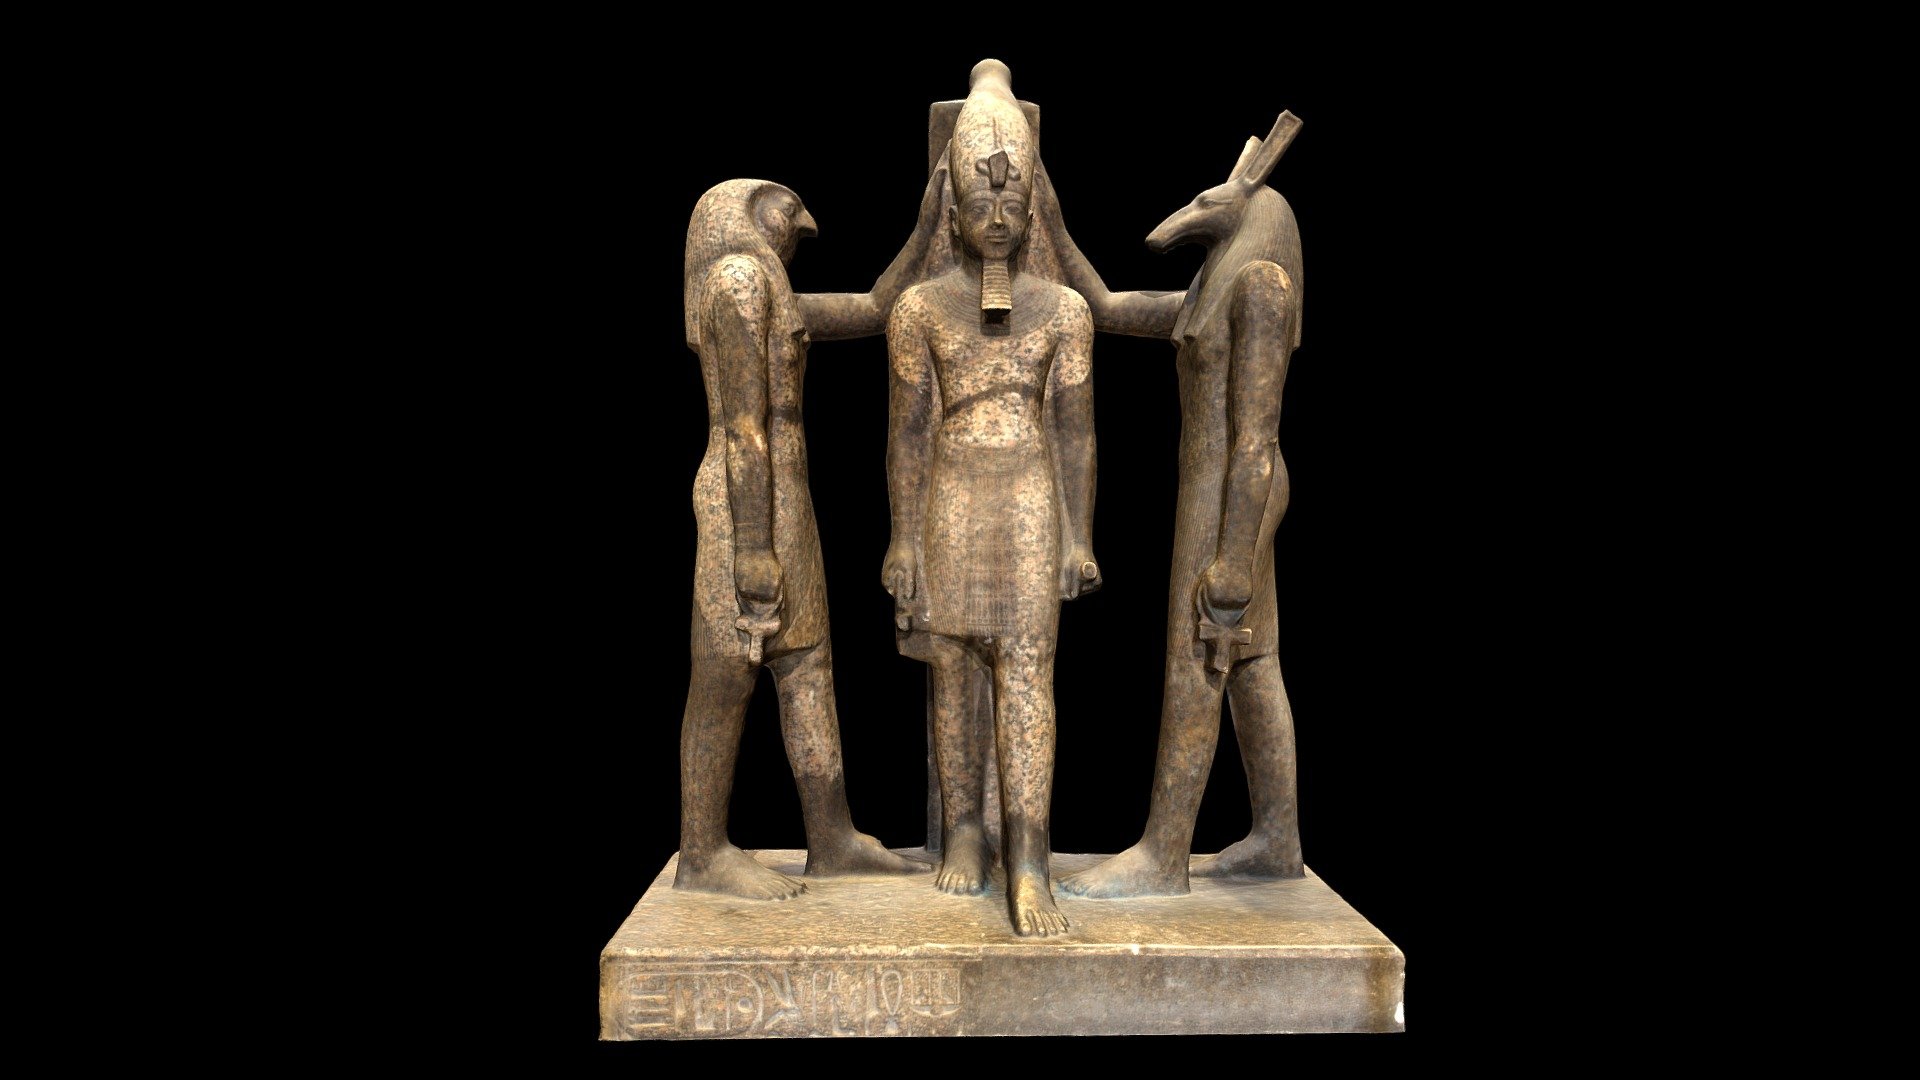 Granite triad of Ramses III with the gods Horus on his right and Seth on his left.  Currently in the Egyptian Museum, Cairo.

Created from 287 photographs (Canon EOS Rebel T5i) using Metashape 1.6.1.  Photographed in January 2018 3d model